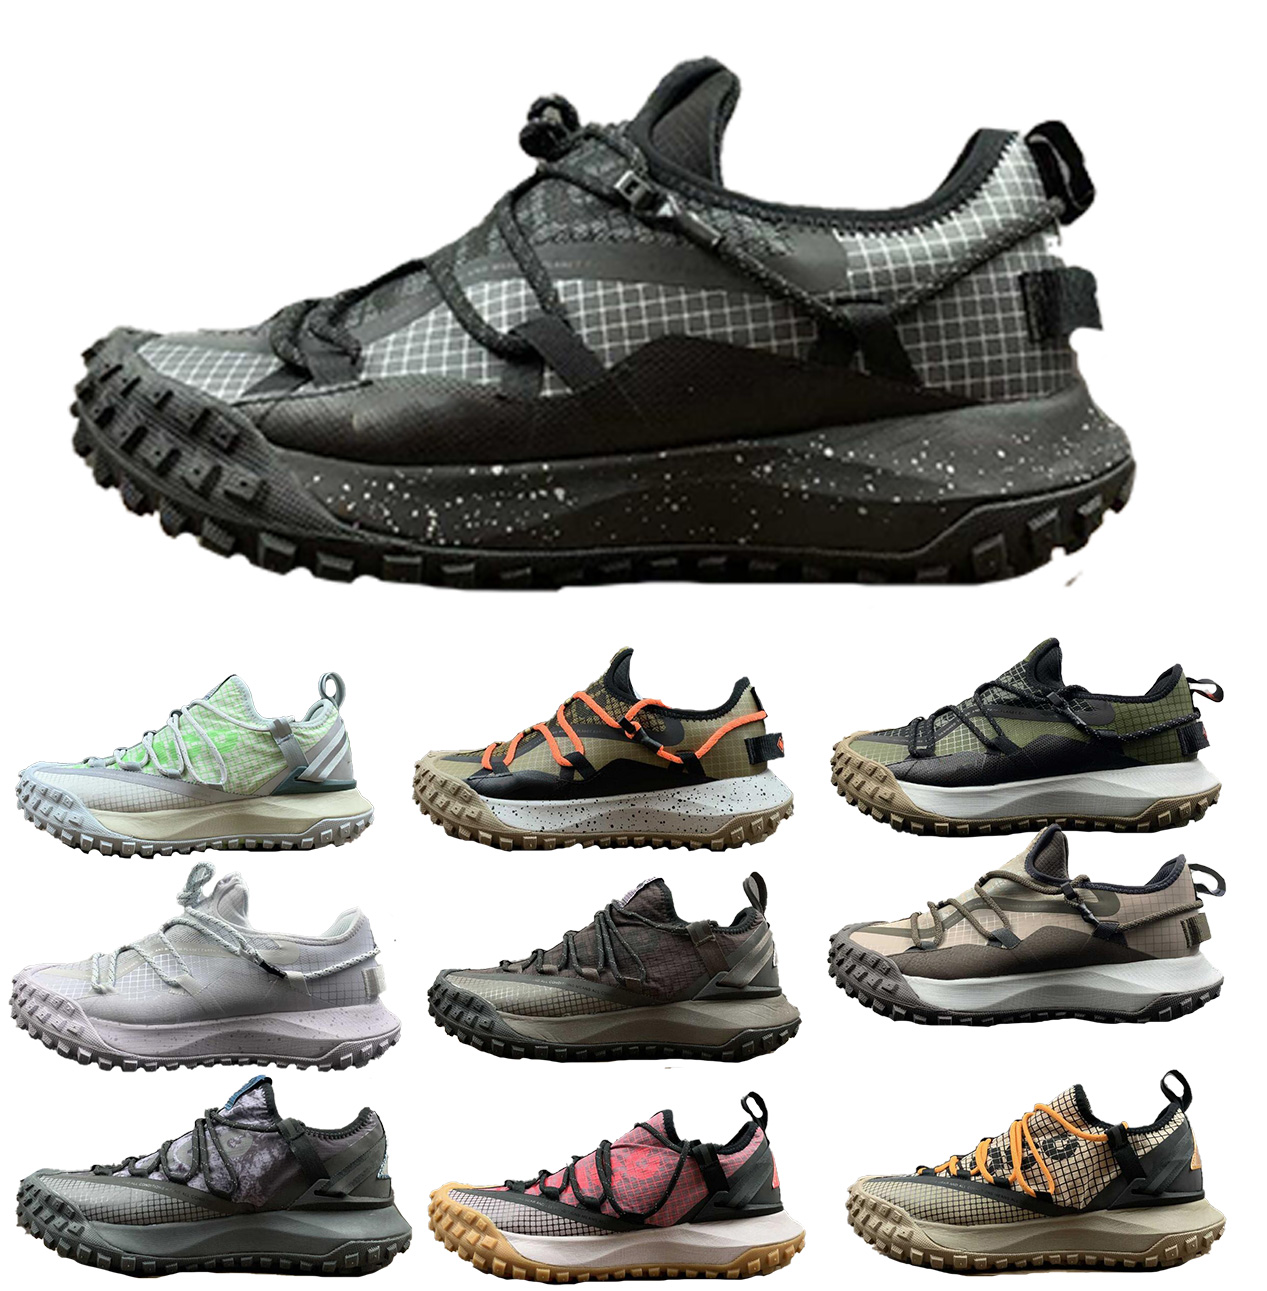 

Mountain fly Low Gtx running shoes Genuine Company Quality Climbing shoe sports for men yakuda dropping accepted Discount training sneakers fashion boots for gym, Do9334-300